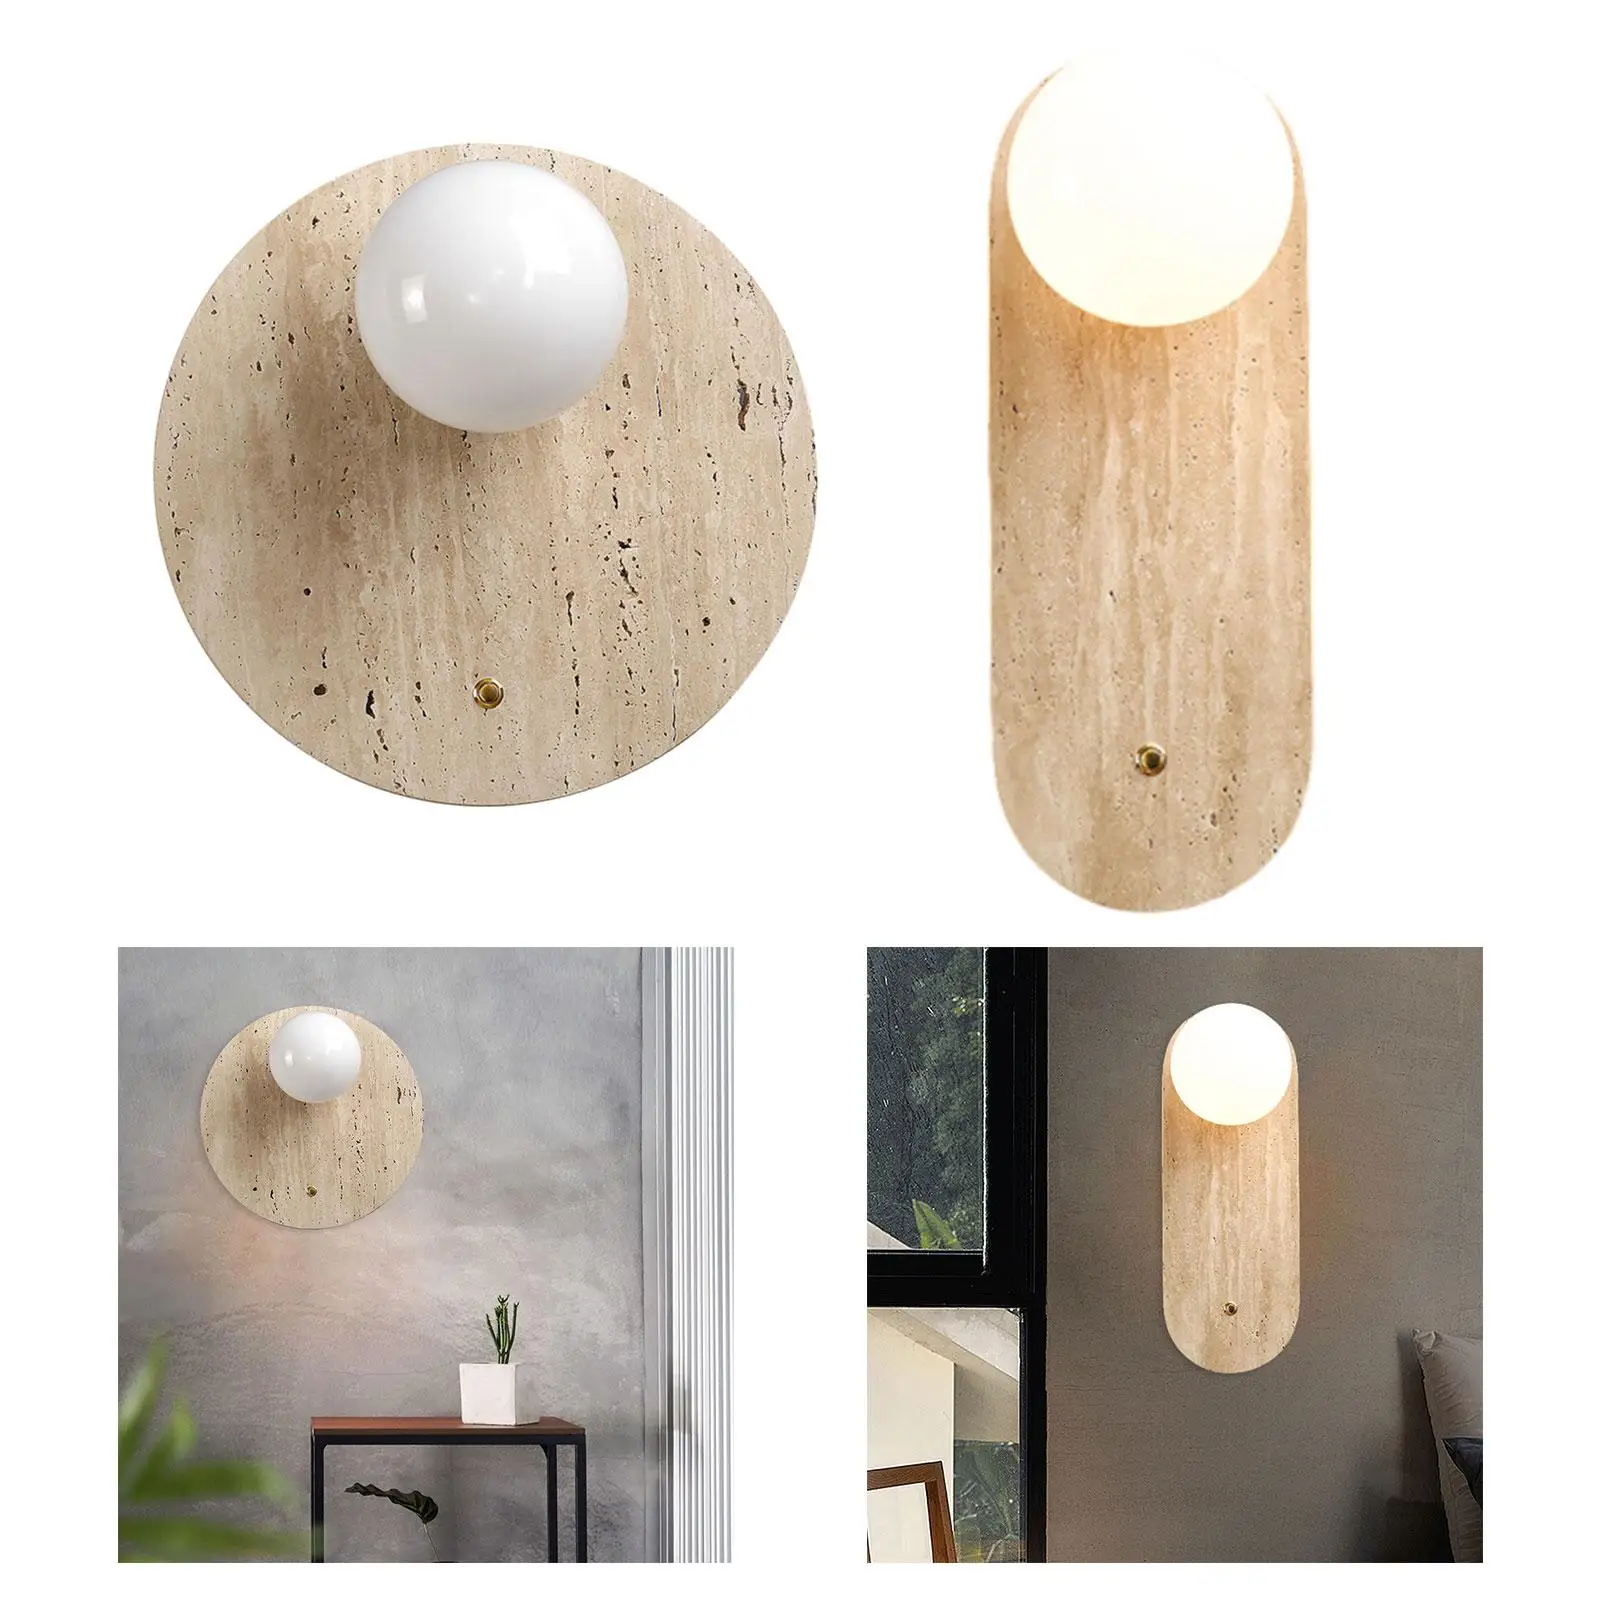 Japanese Bulb Not Included Bathroom Light Lamp Shade Farmhouse Wall Sconces for Porch Bedside Living Room Dining Room Bathroom